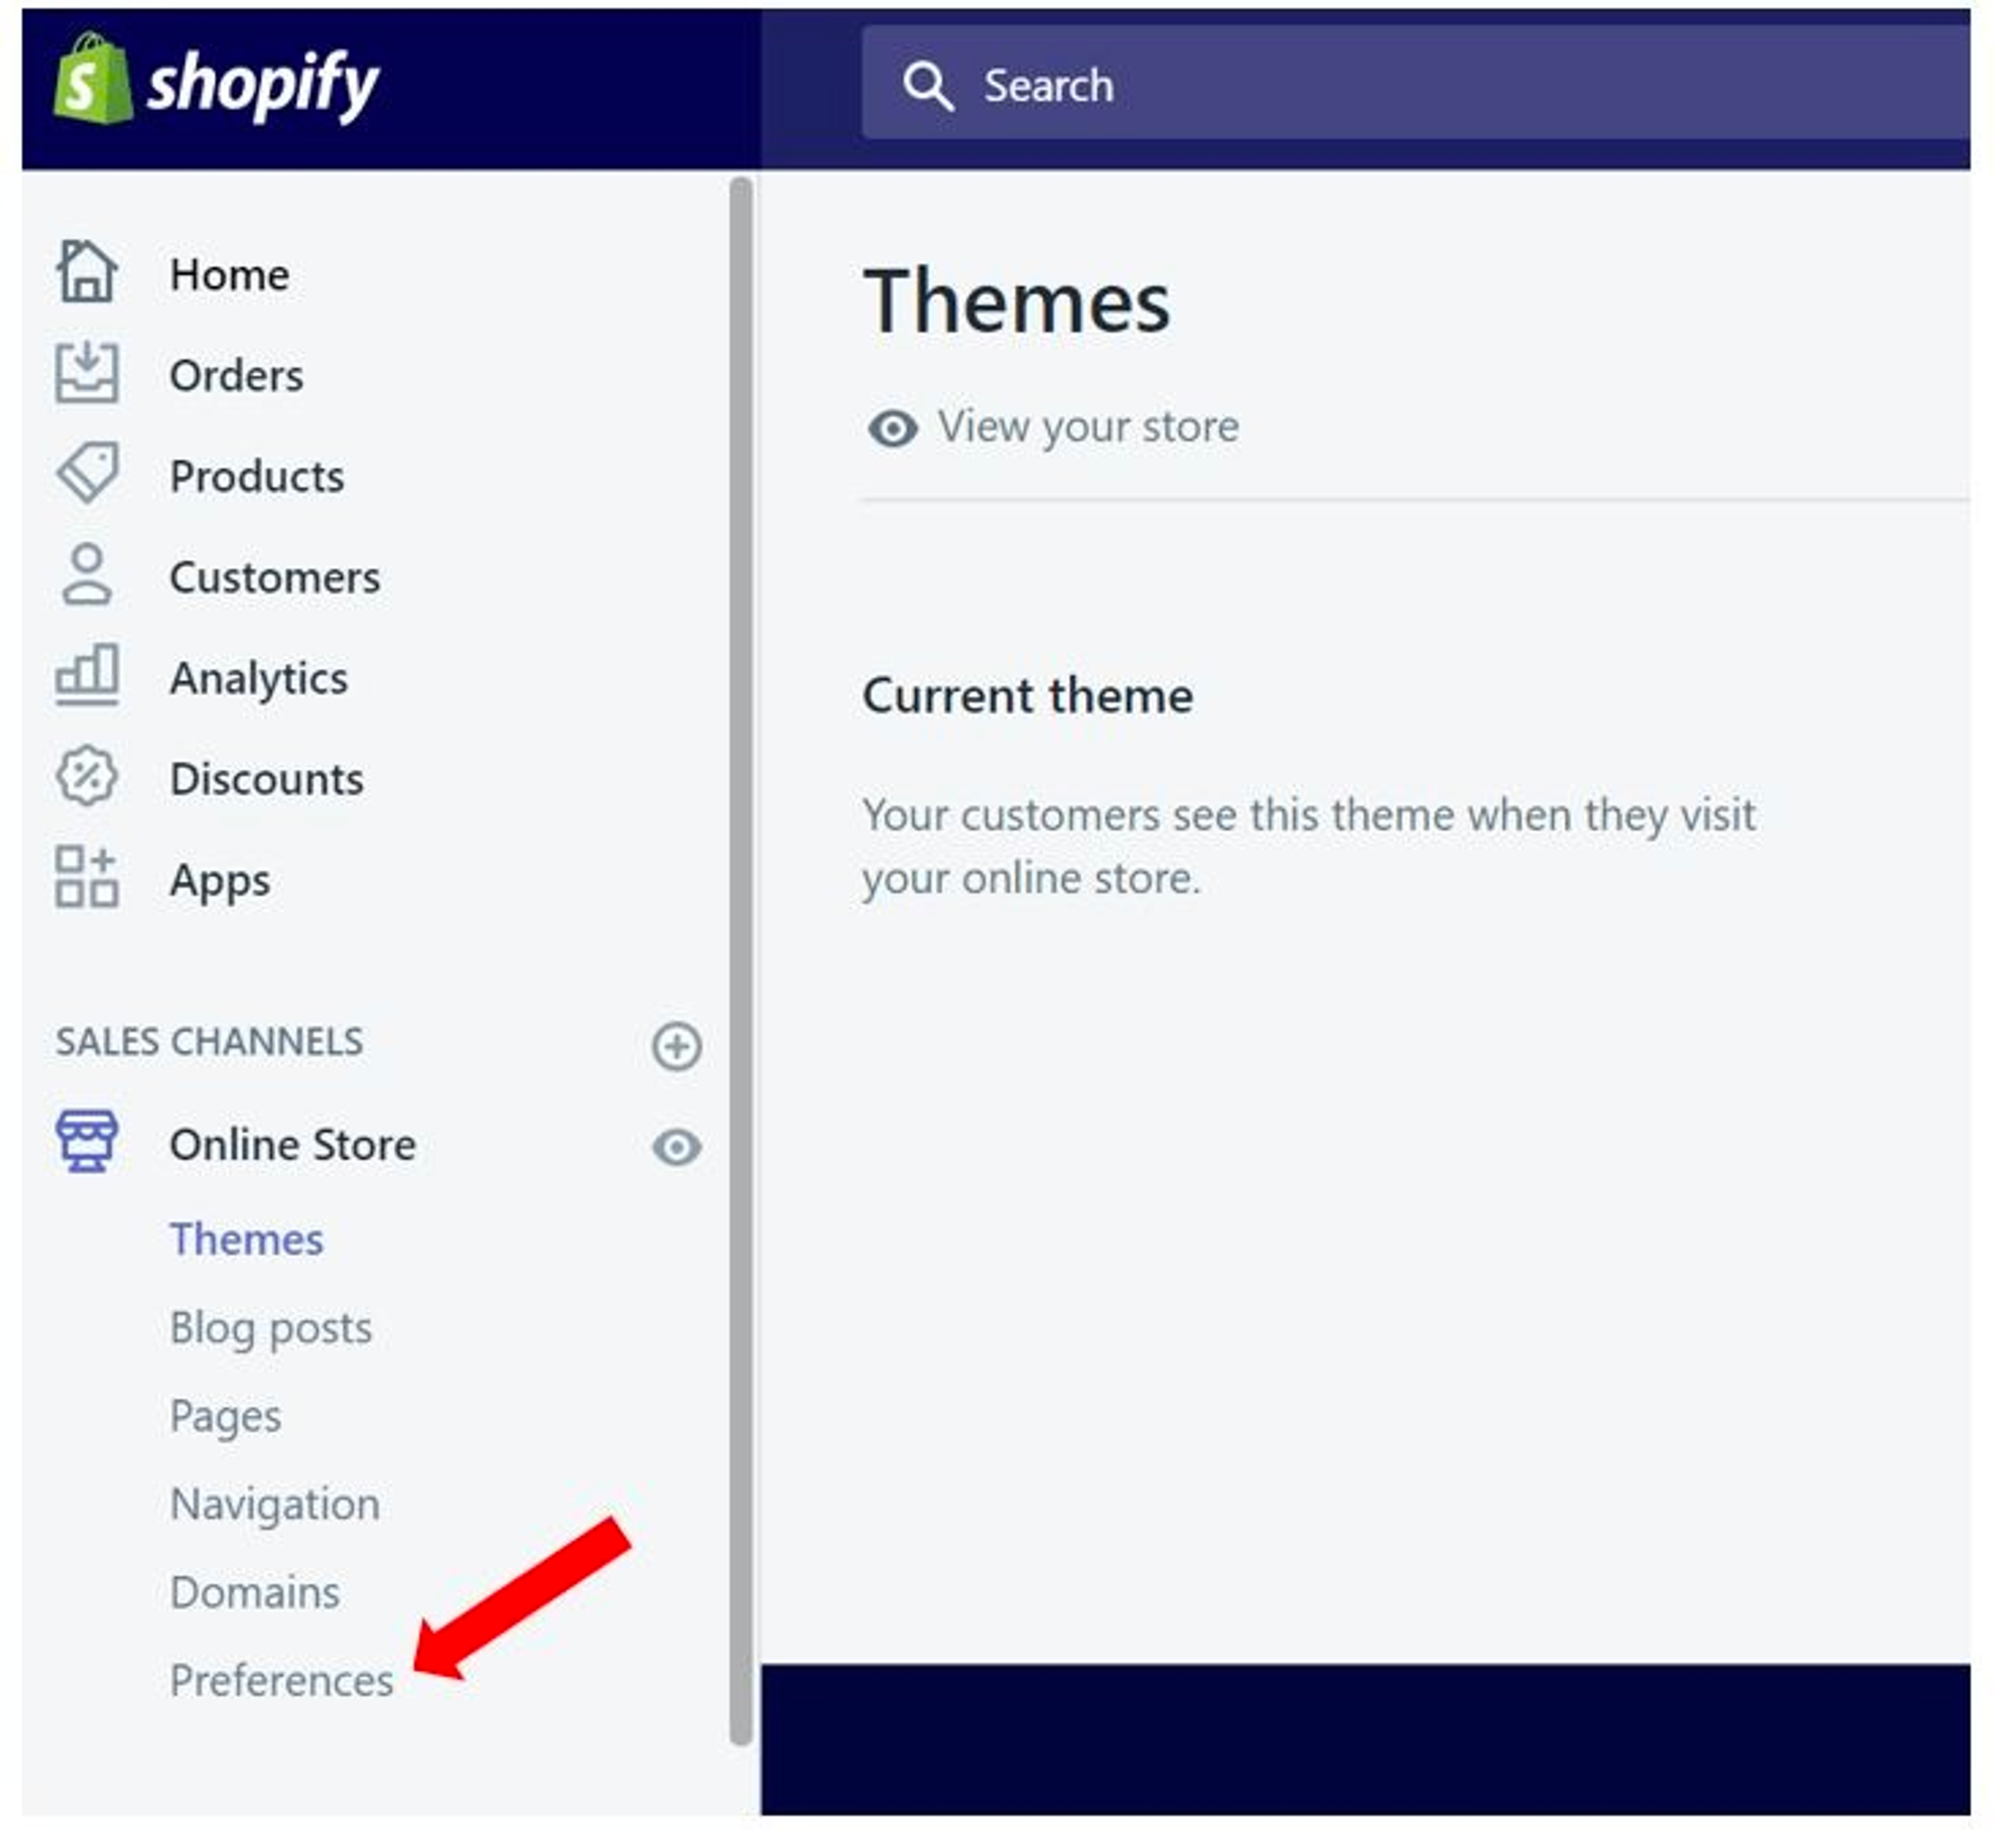 Screenshot of Shopify UI and the preferences link